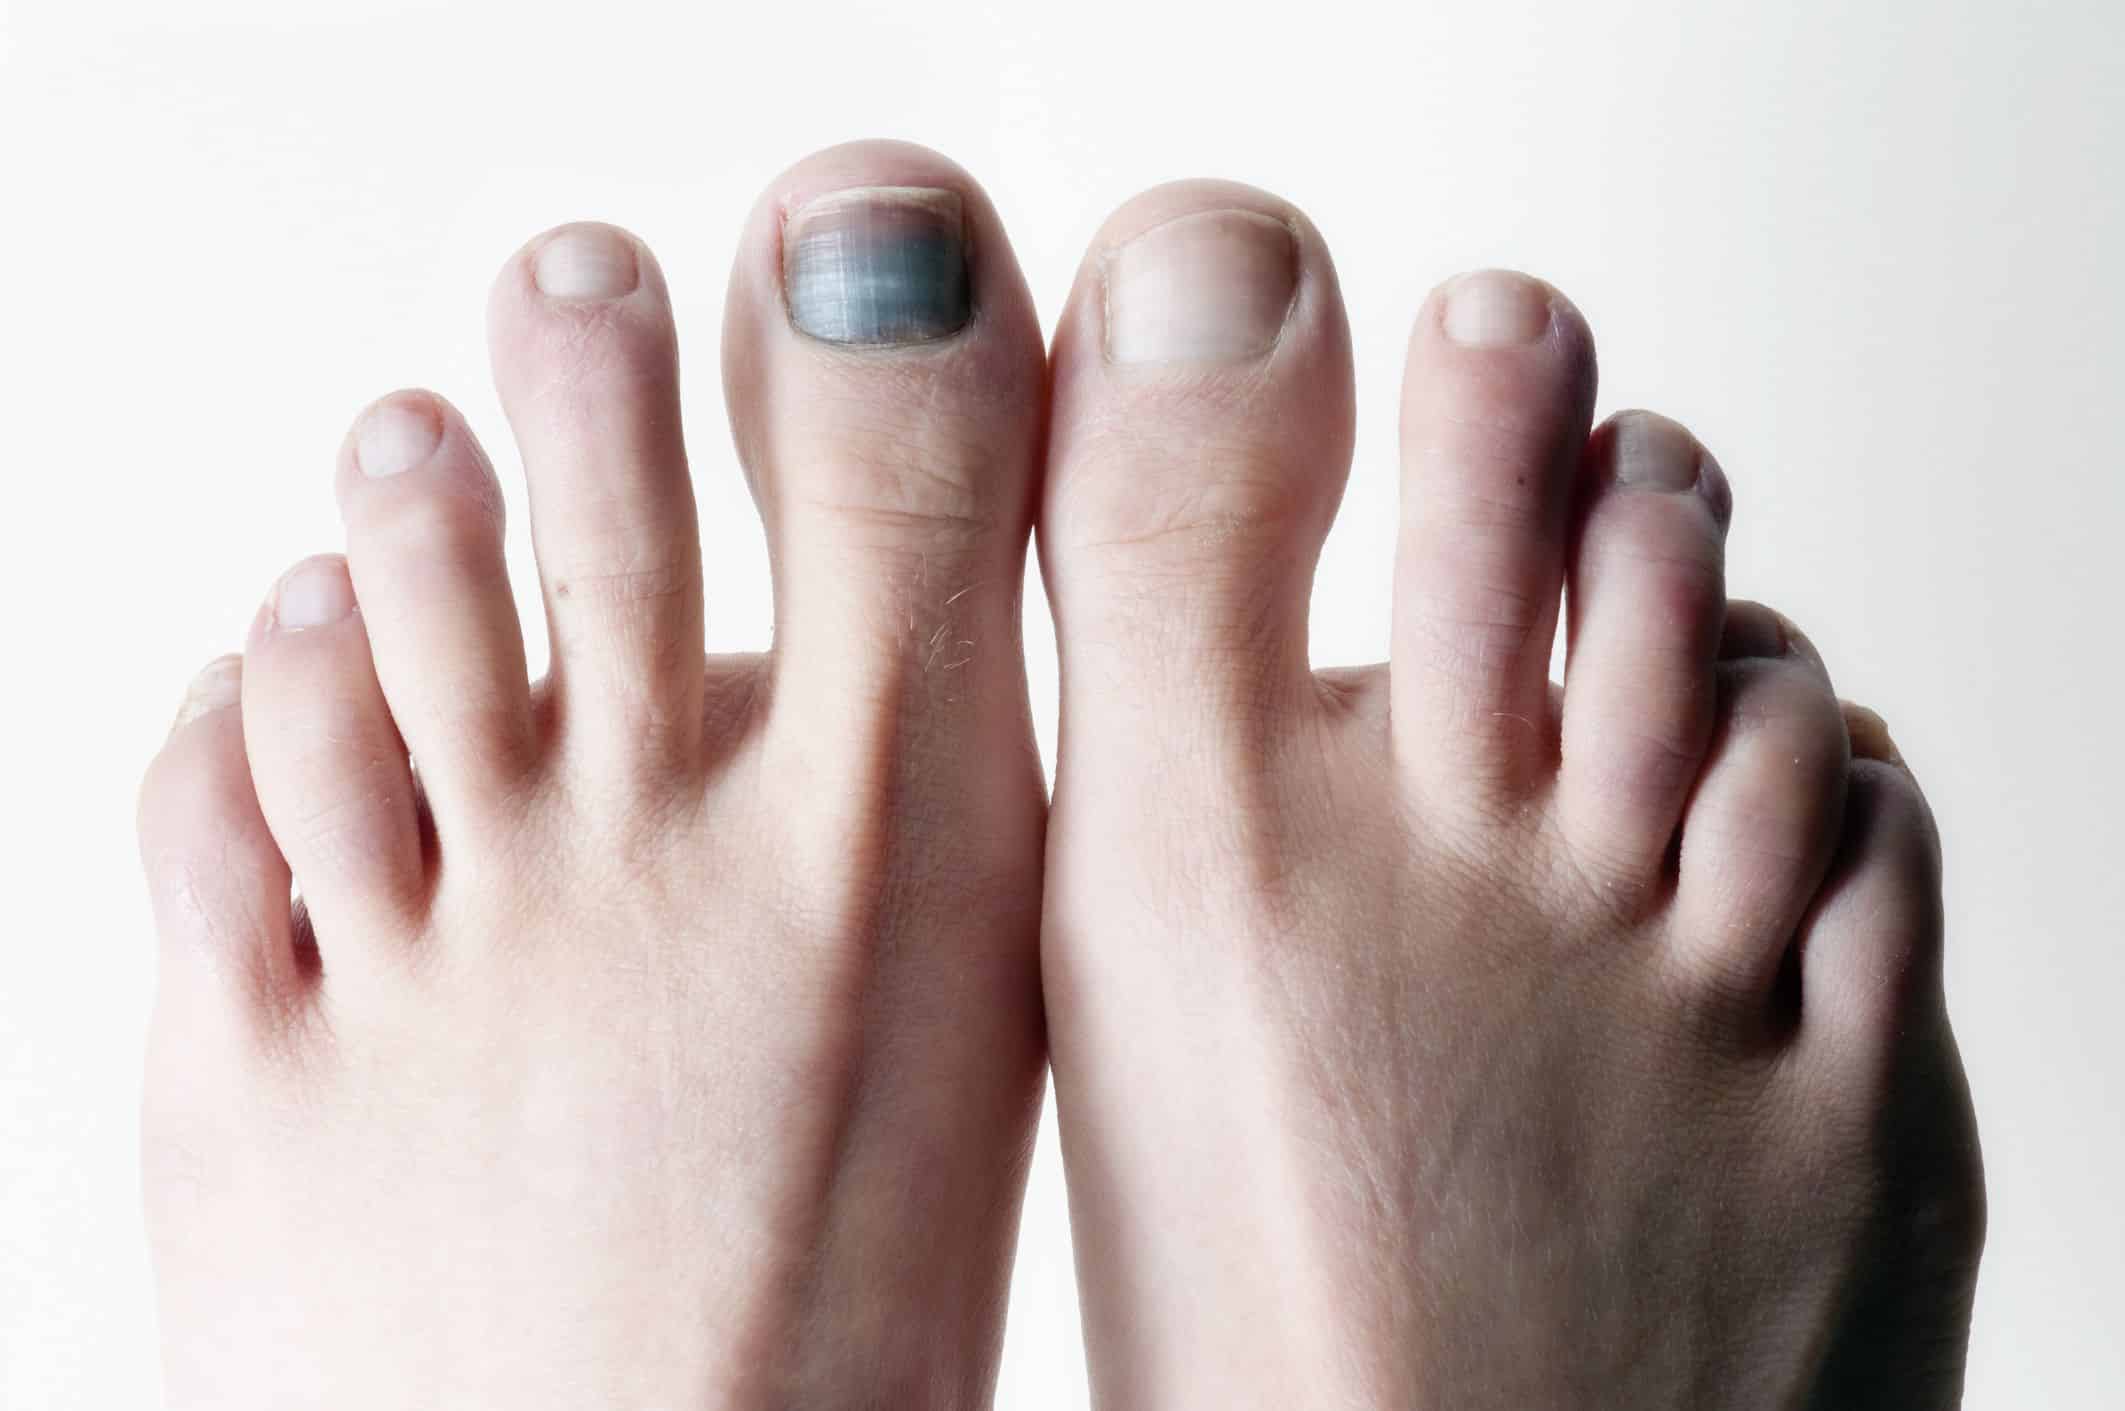 Black Toenail Cancer: Things You Must Know